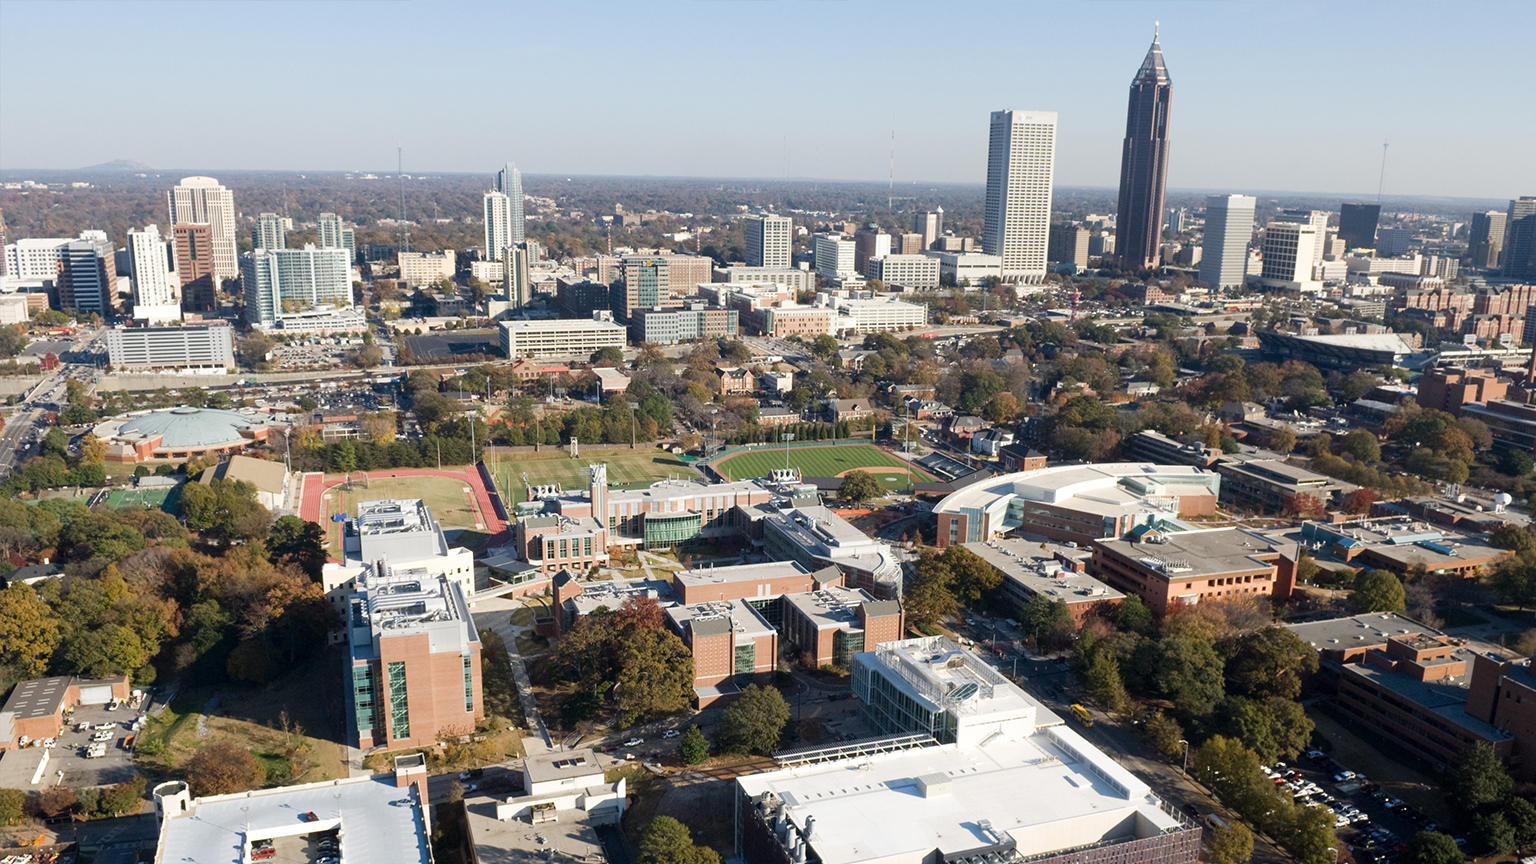 Atlanta cityscape and the Georgia Tech campus. Life Sciences and Technology Complex - Ford Motor Co. Environmental Science and Technology Building (ES&T), U. A. Whitaker Biomedical Engineering Building (BME), Parker H. Petit Institute for Bioengineering and Bioscience (IBB), Molecular Science and Engineering Building (M Building), Marcus Nanotechnology Building, Klaus Advanced Computing building, Russell Chandler baseball stadium, Alexander Memorial Coliseum